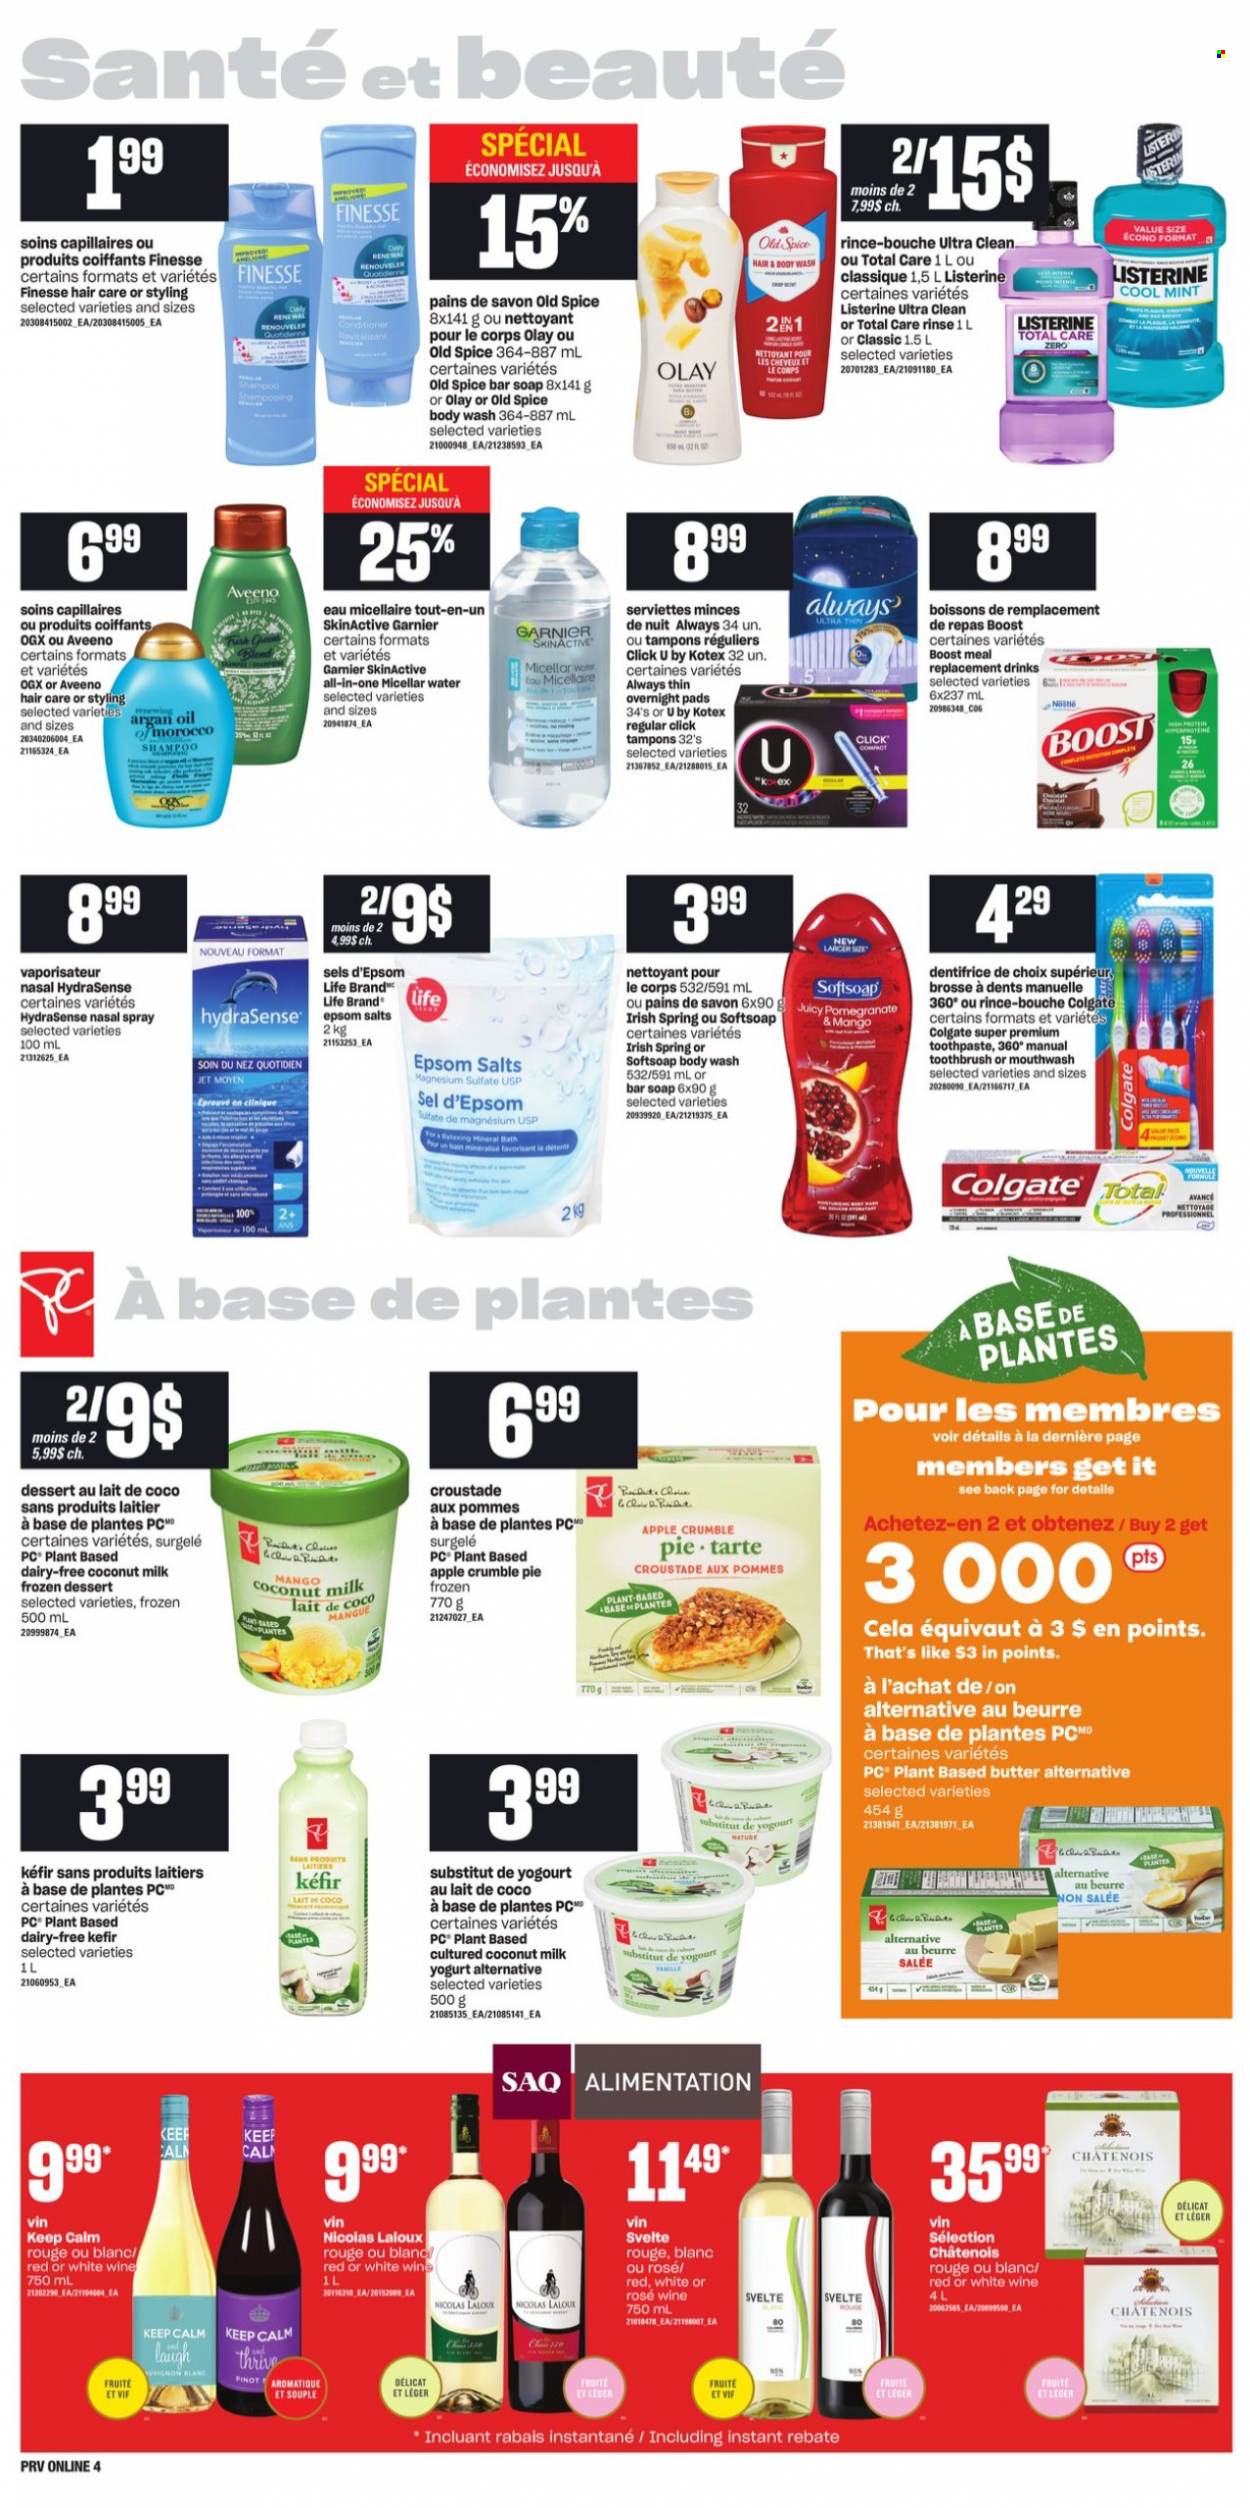 thumbnail - Provigo Flyer - October 07, 2021 - October 13, 2021 - Sales products - pie, pomegranate, yoghurt, kefir, butter, coconut milk, spice, Boost, wine, rosé wine, Aveeno, Jet, body wash, Softsoap, soap bar, soap, toothbrush, toothpaste, mouthwash, sanitary pads, Kotex, tampons, Clinique, micellar water, Olay, OGX, conditioner, magnesium, argan oil, nasal spray, Colgate, Garnier, Listerine, shampoo, Old Spice. Page 12.